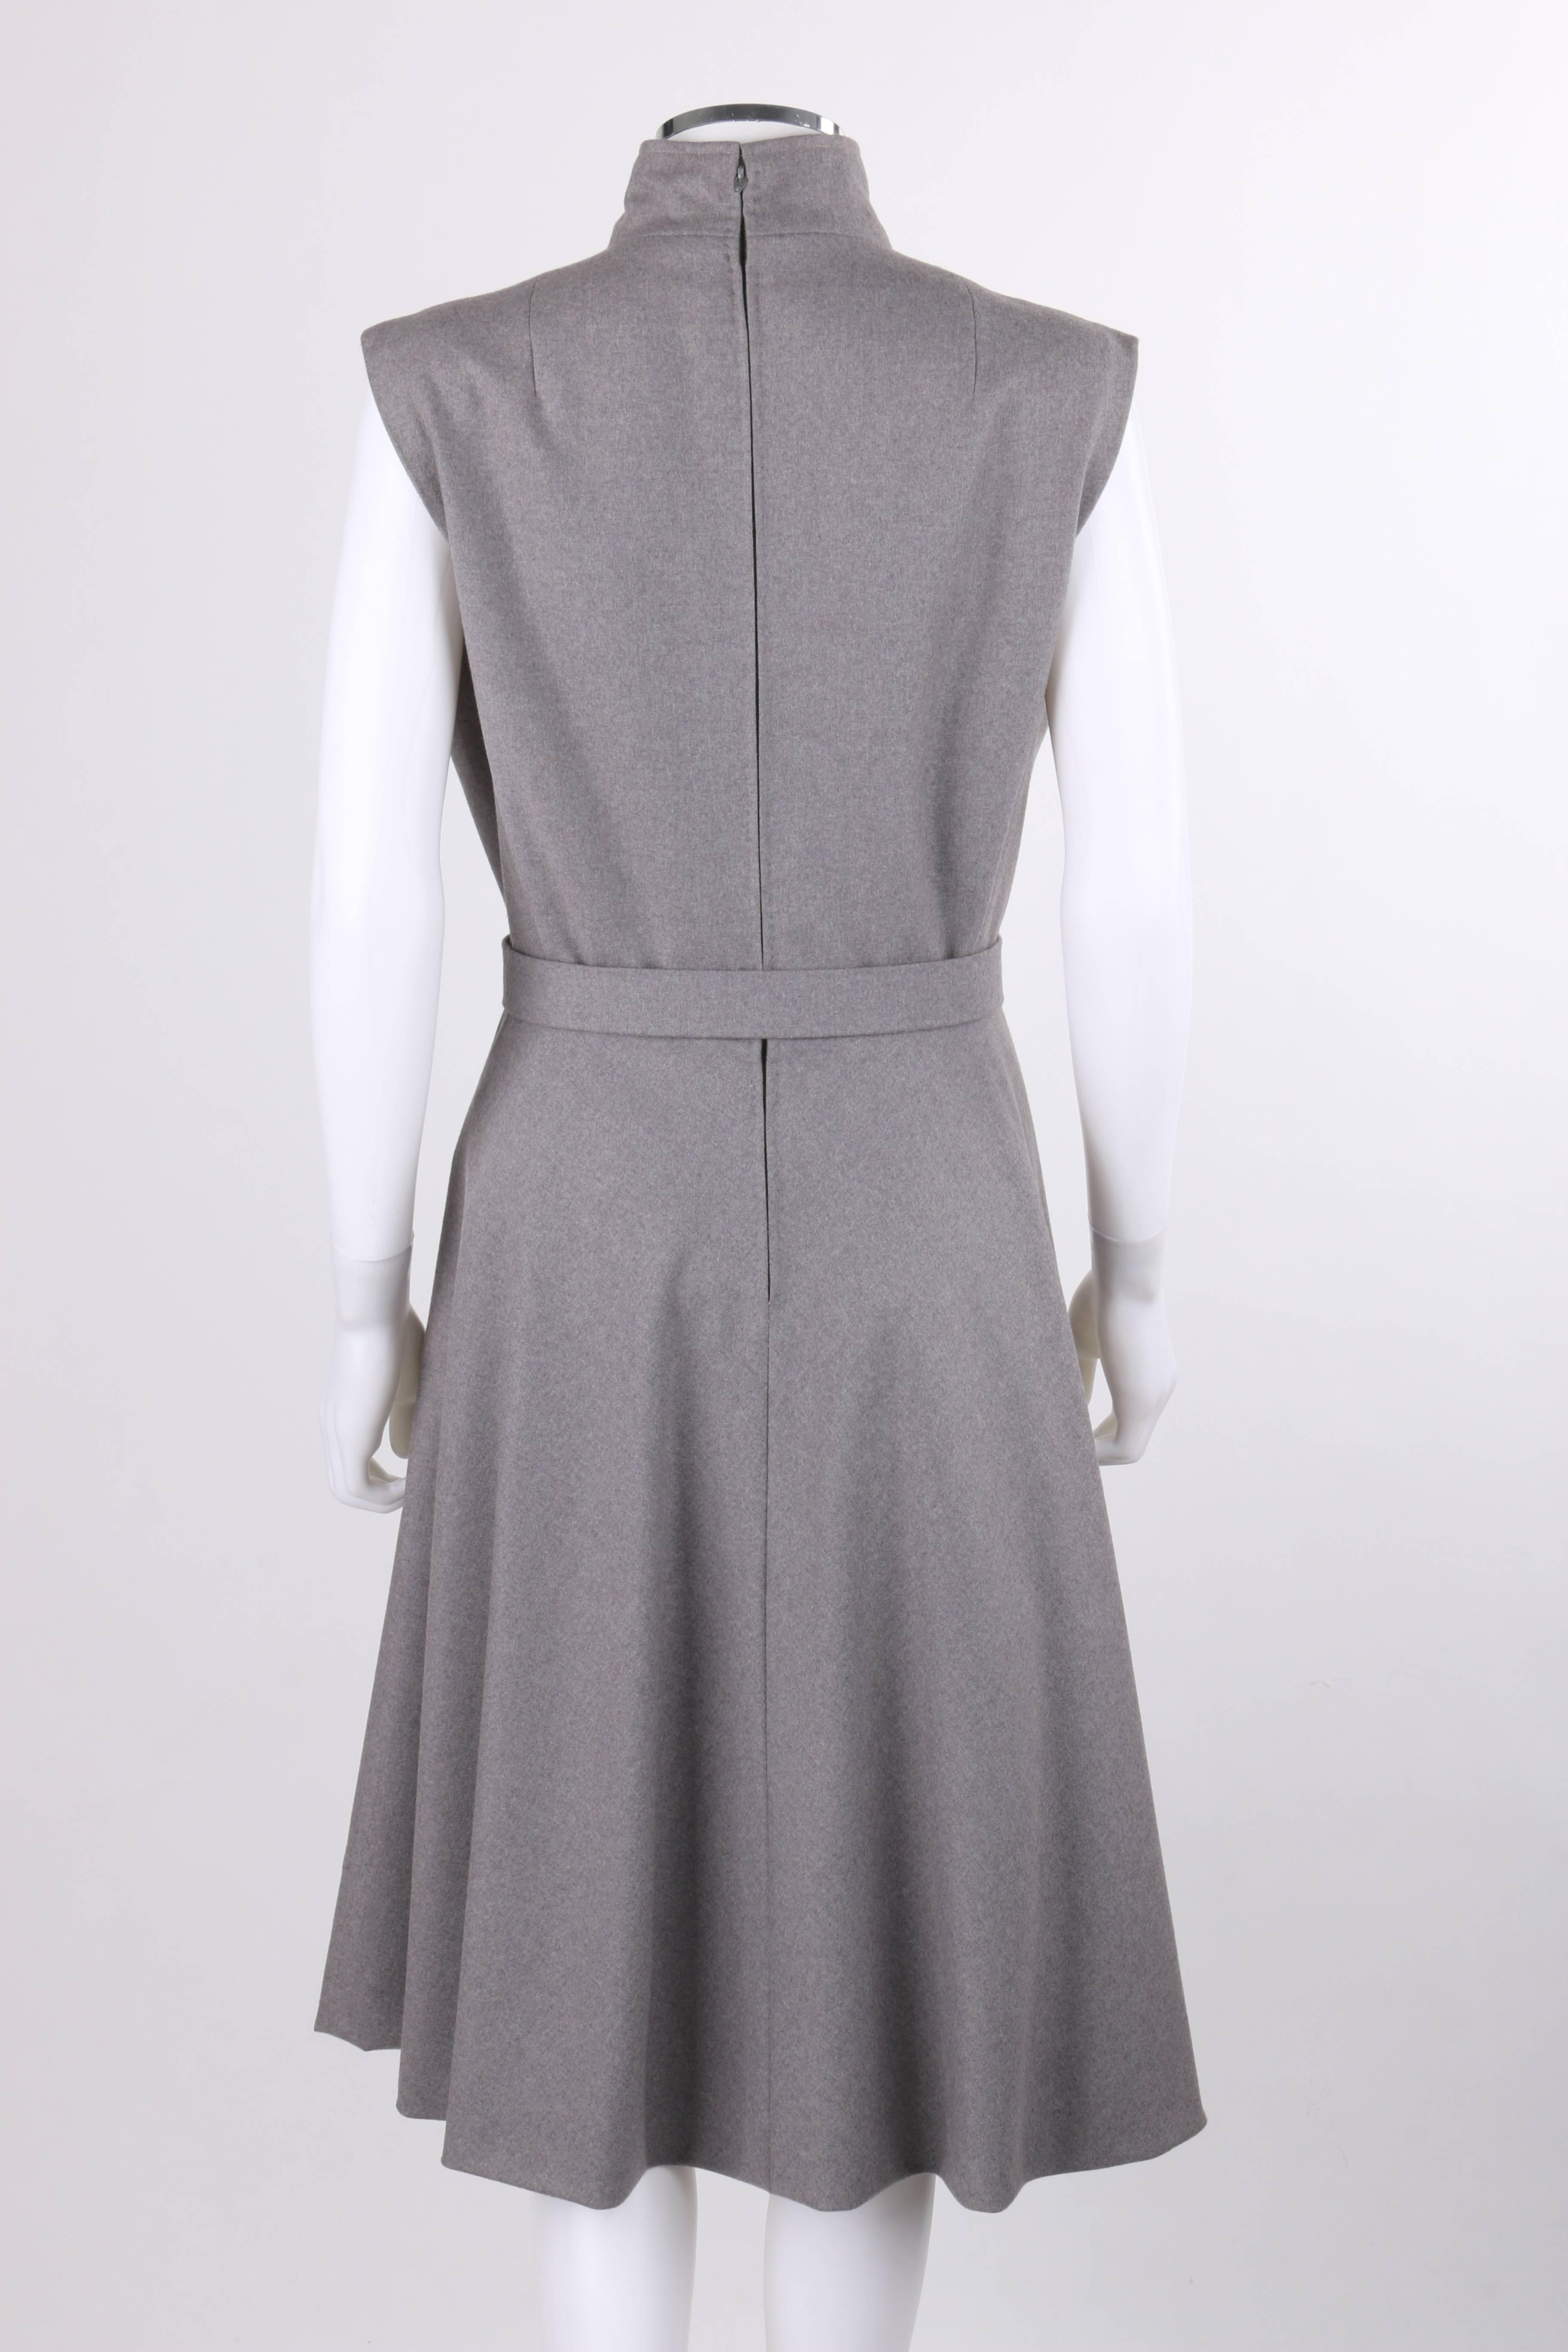 Women's PAULINE TRIGERE c.1980's Gray Wool Extended Shoulder Belted Day Dress